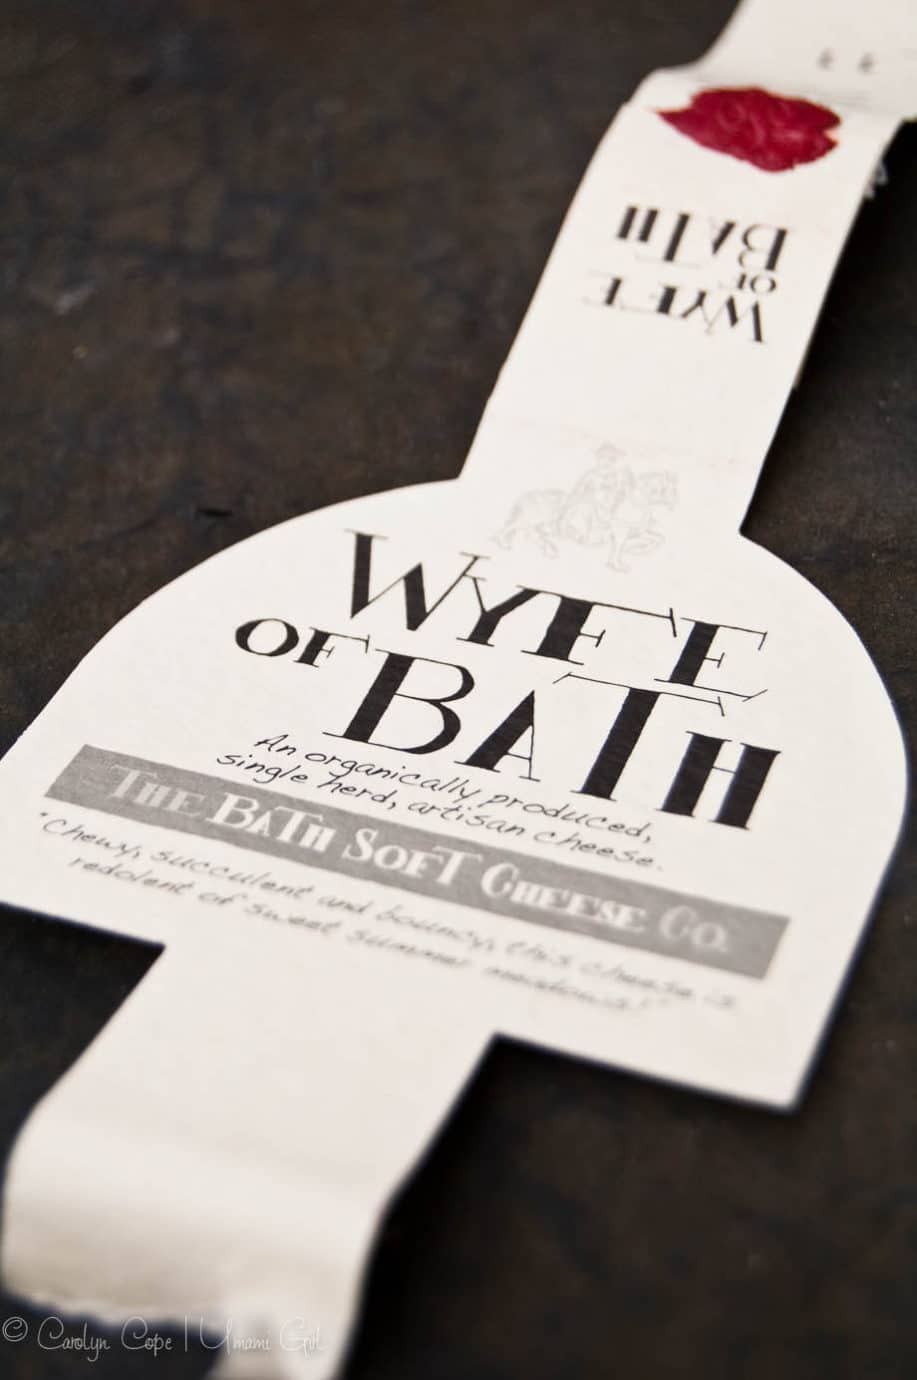 label from wyfe of bath cheese on a dark background